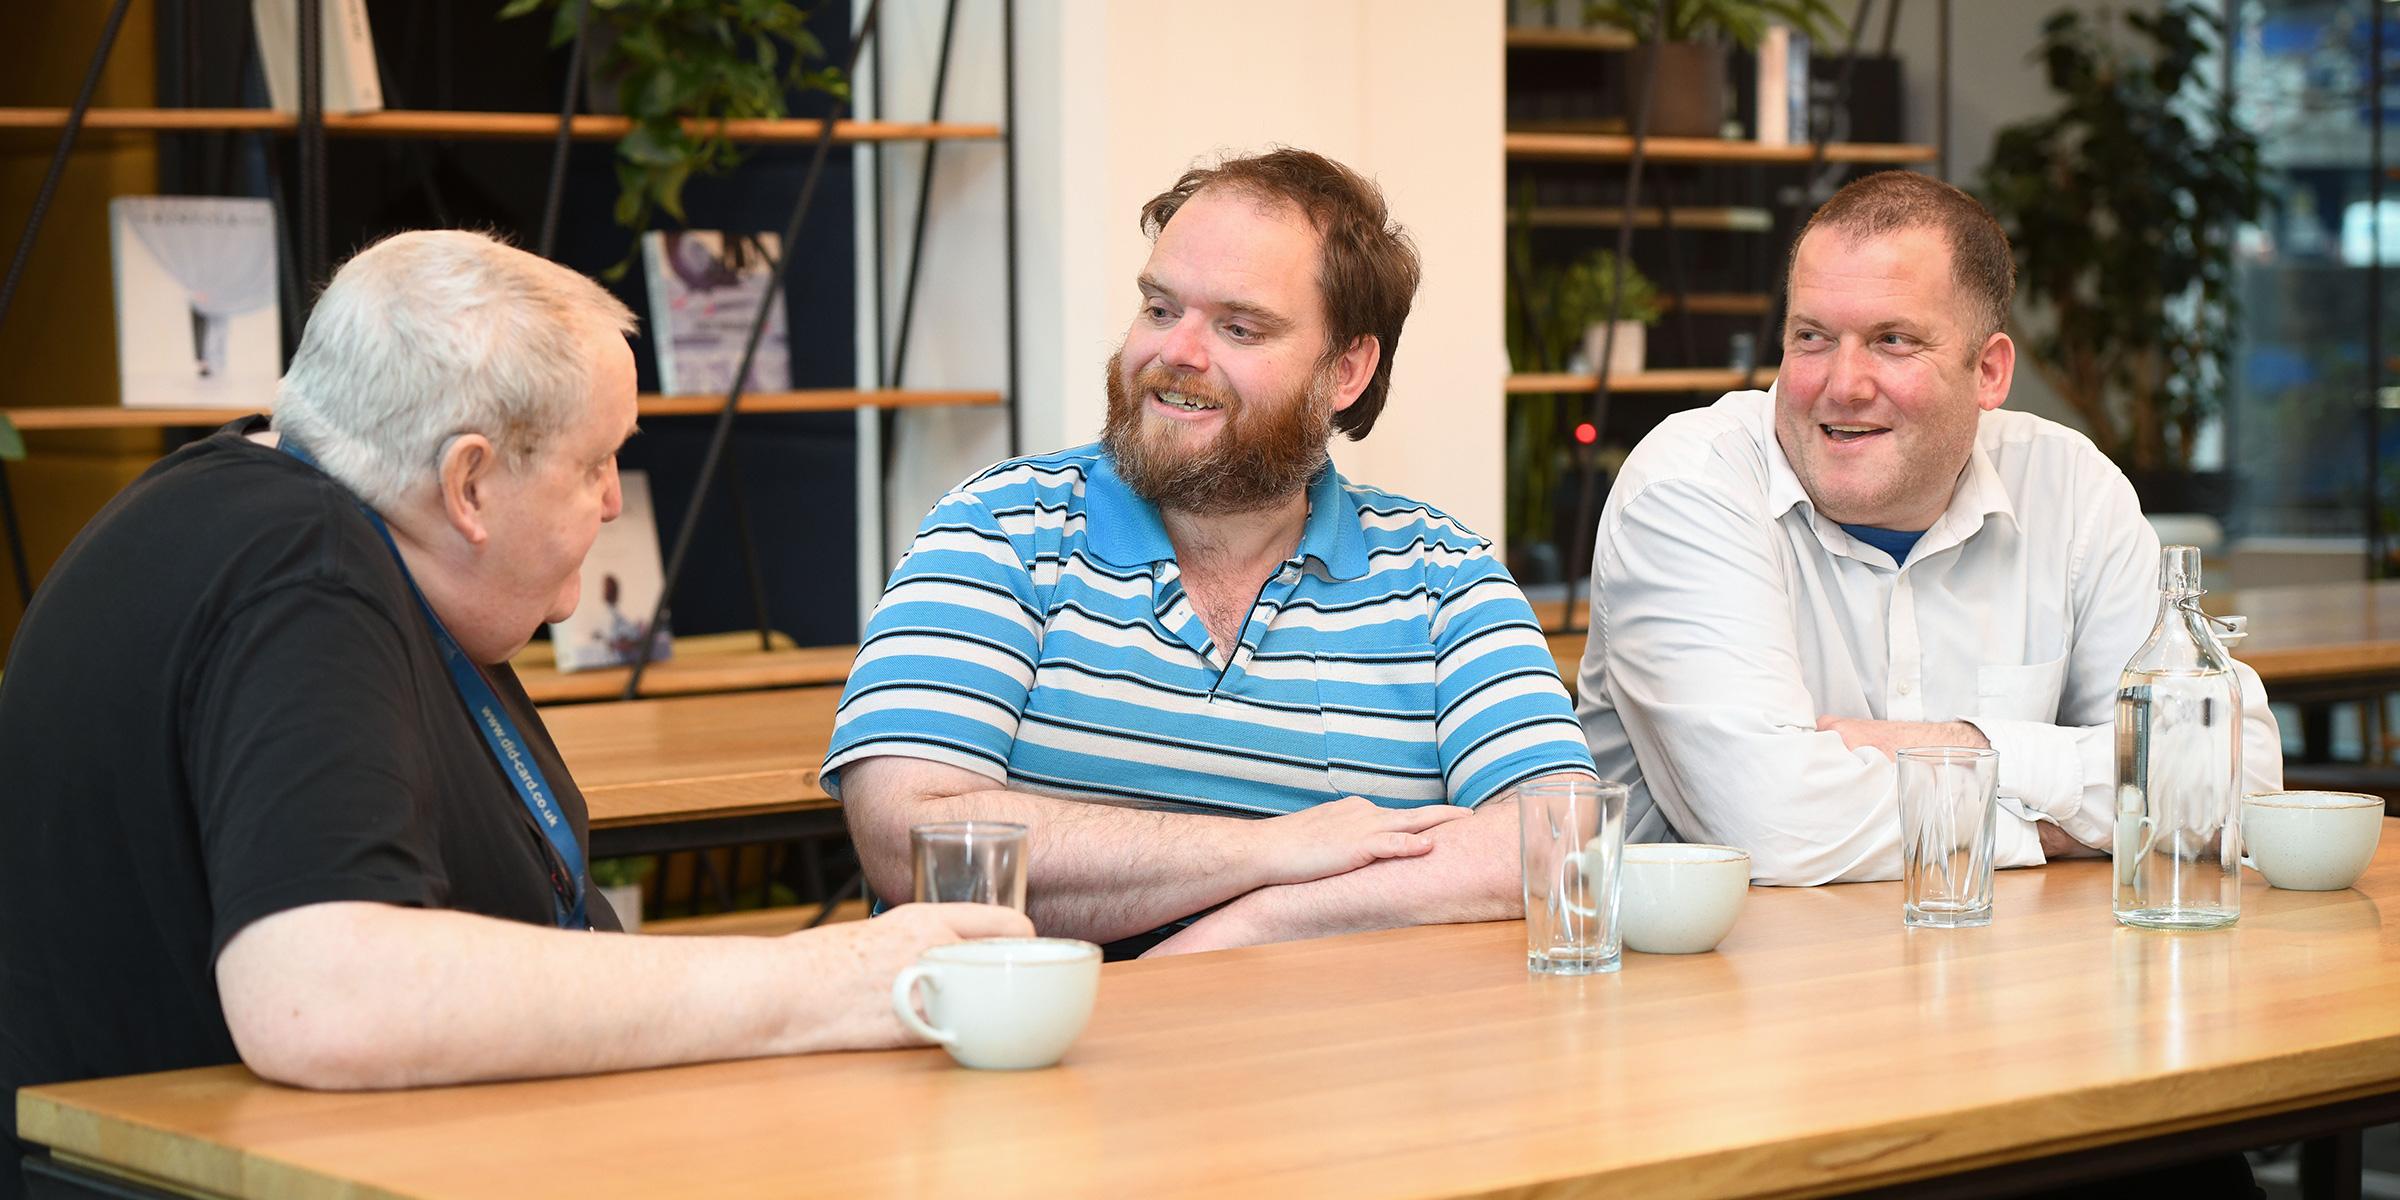 Left to right: Bob Joesbury, Adam Joesbury and Neil Joesbury sit and have a coffee together